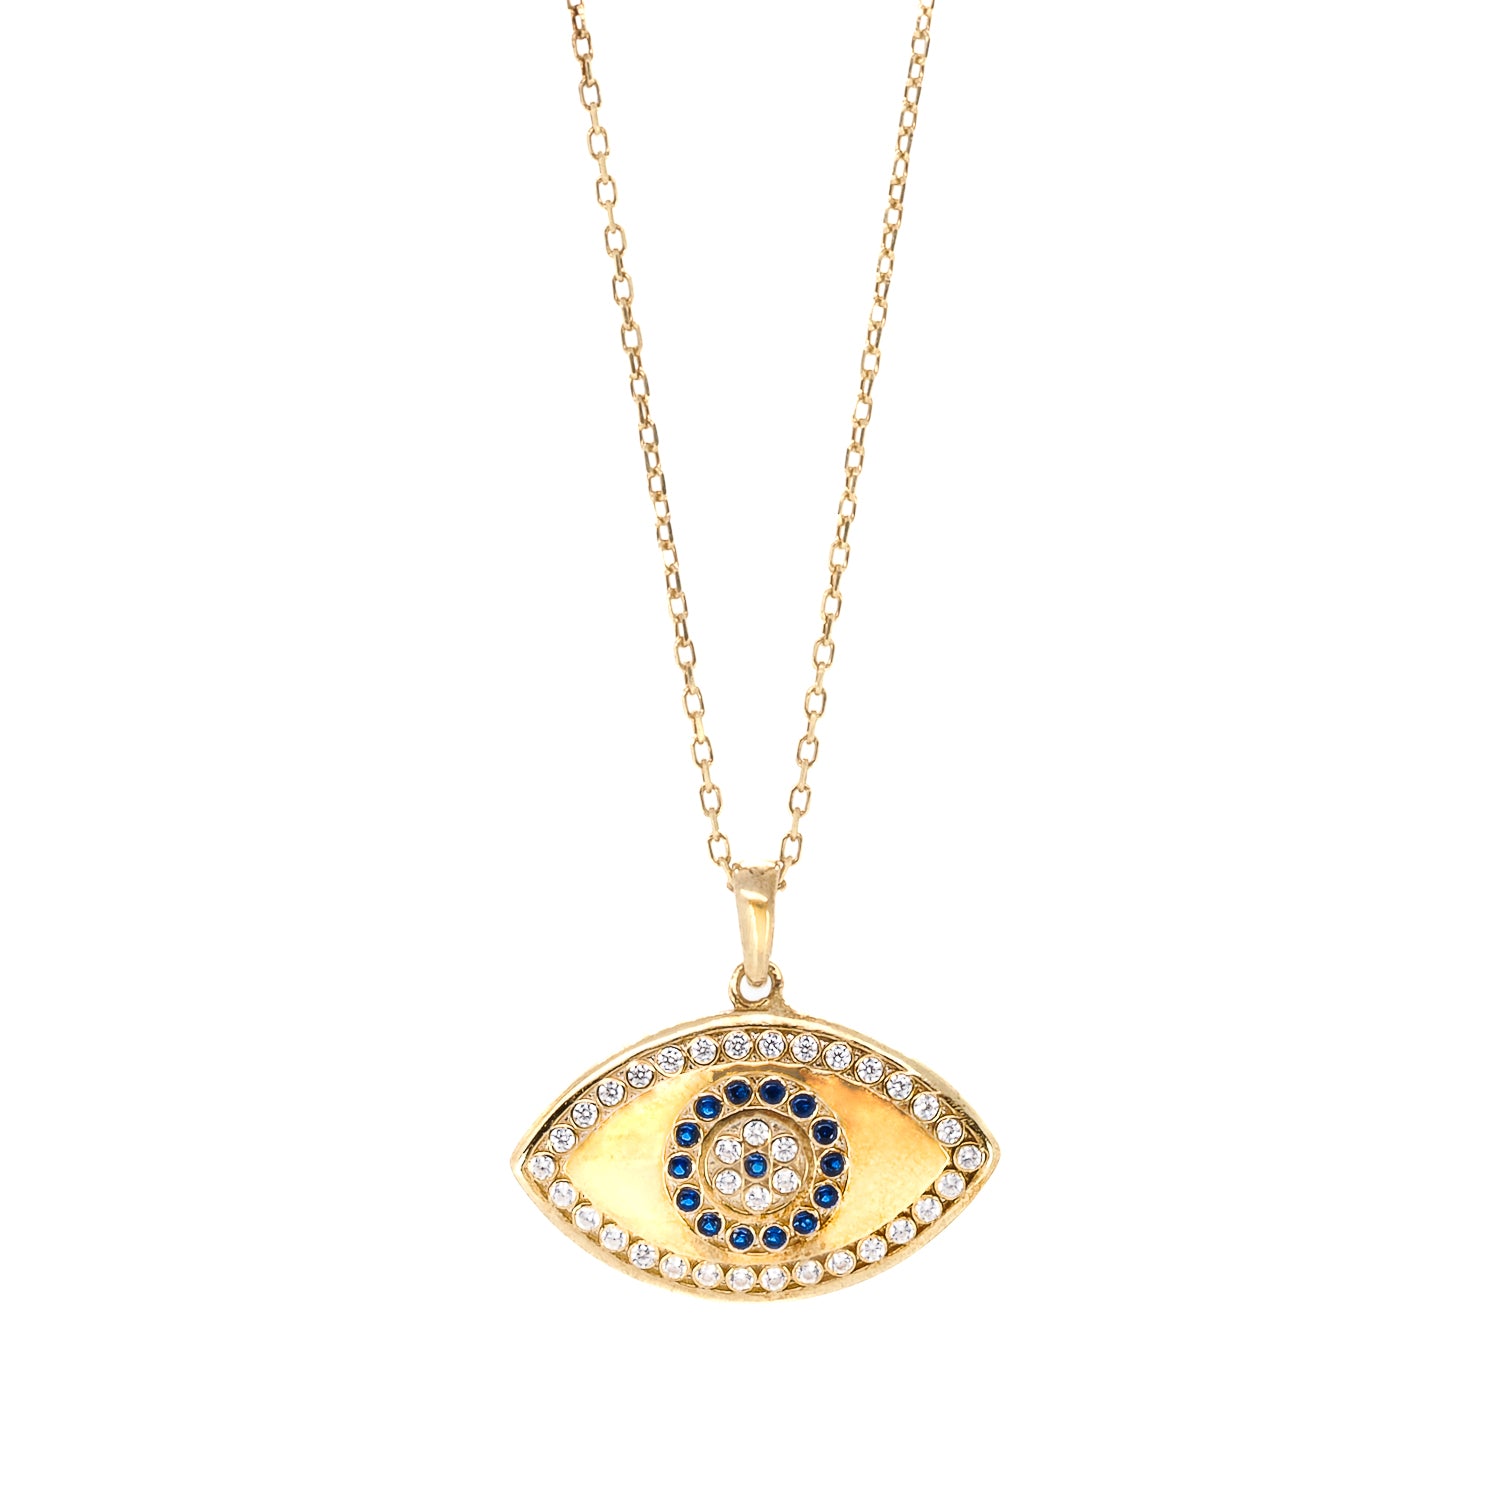 Eye of Power Necklace - Stylish and elegant handmade necklace with a mystic evil eye pendant and zircon stones, perfect for any occasion.